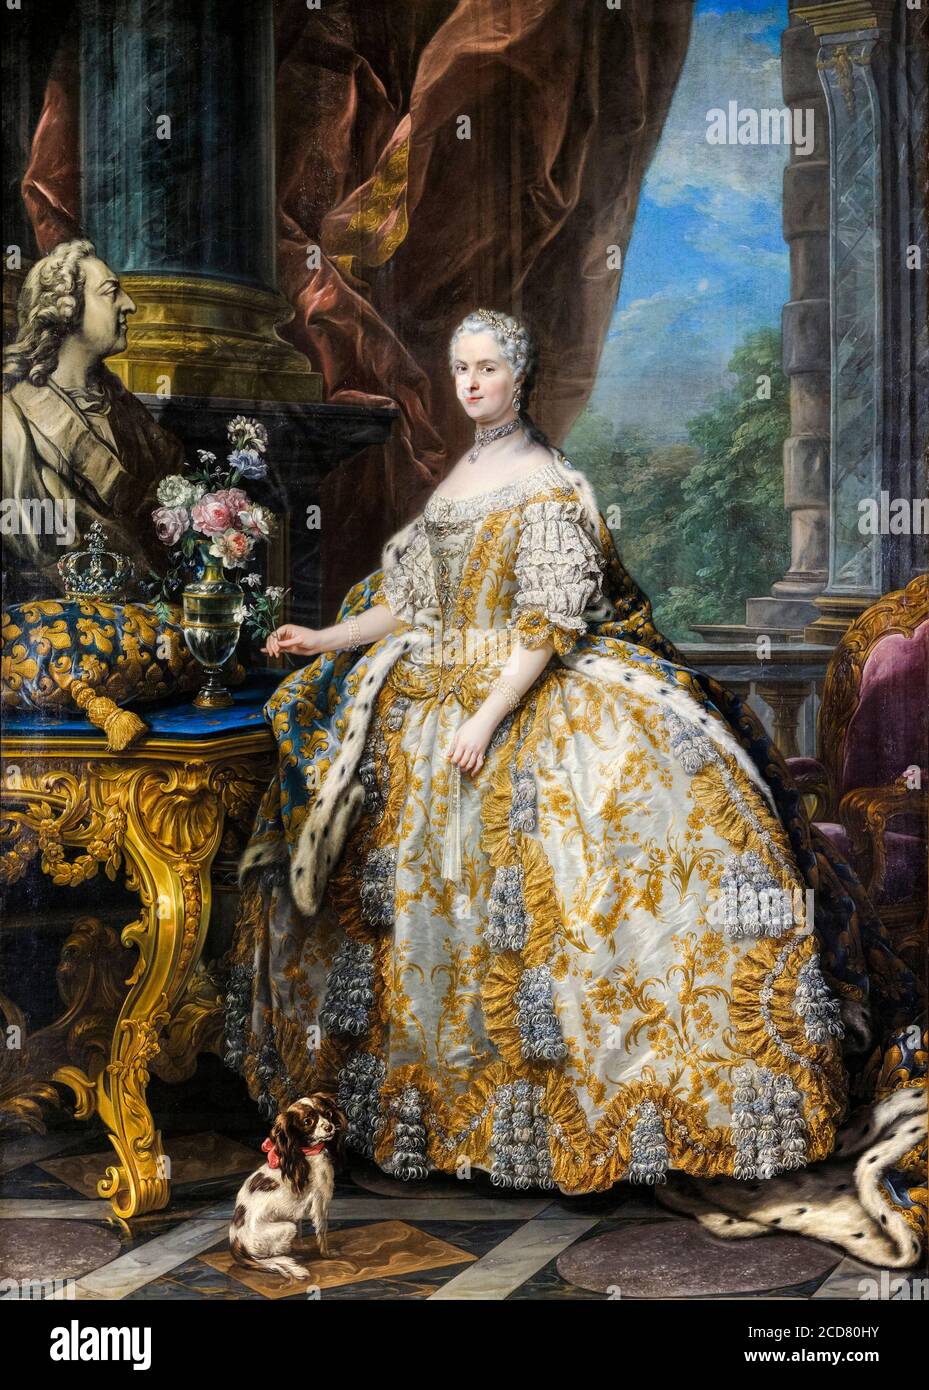 Marie Leszczinska (1703-1768), Queen of France, portrait painting by Charles-André van Loo, 1747 Stock Photo